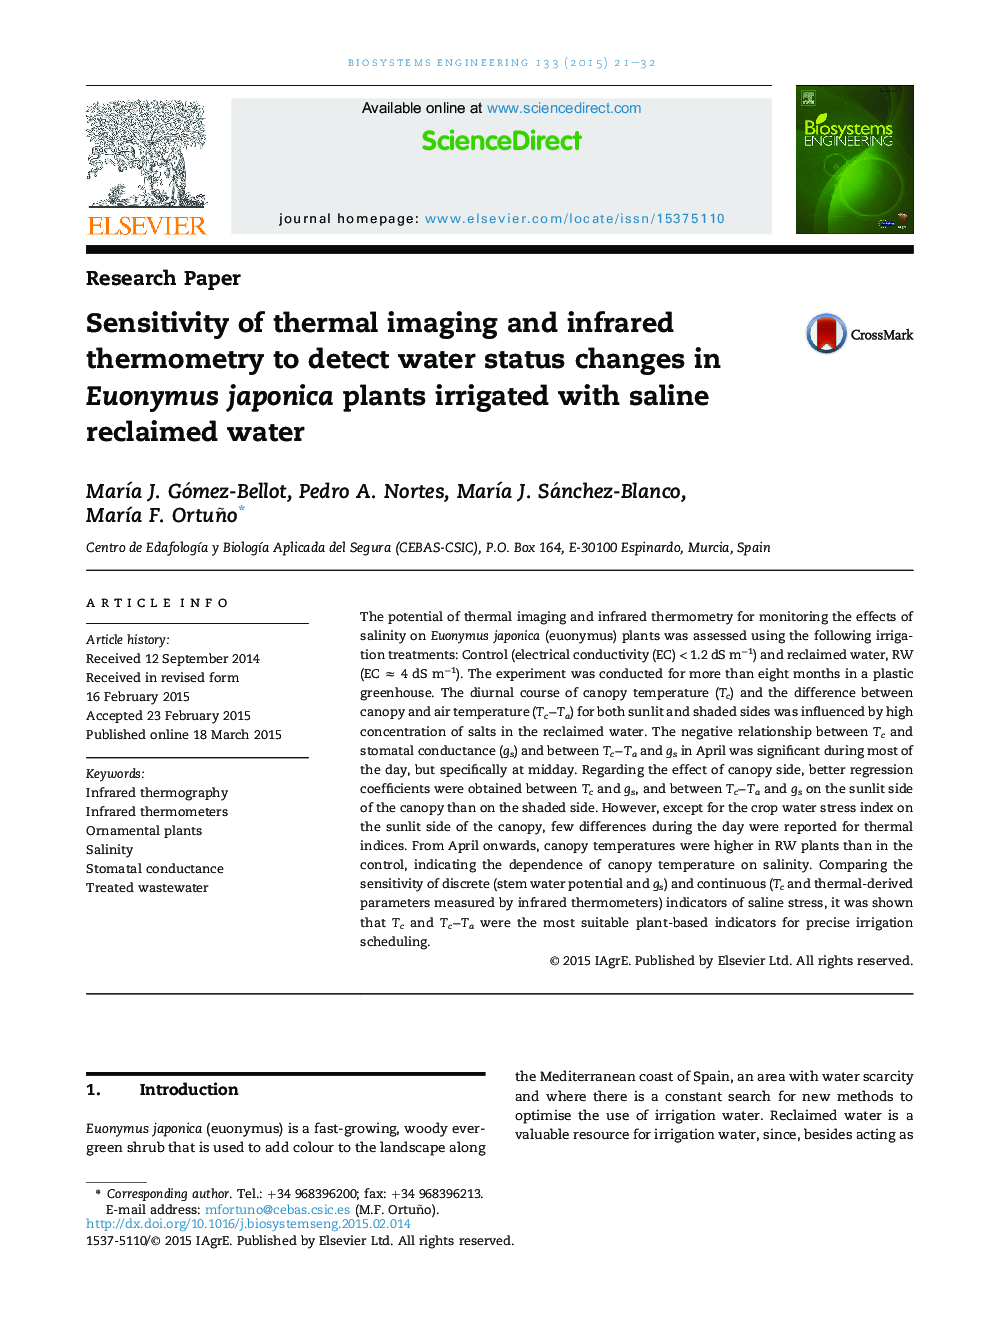 Sensitivity of thermal imaging and infrared thermometry to detect water status changes in Euonymus japonica plants irrigated with saline reclaimed water